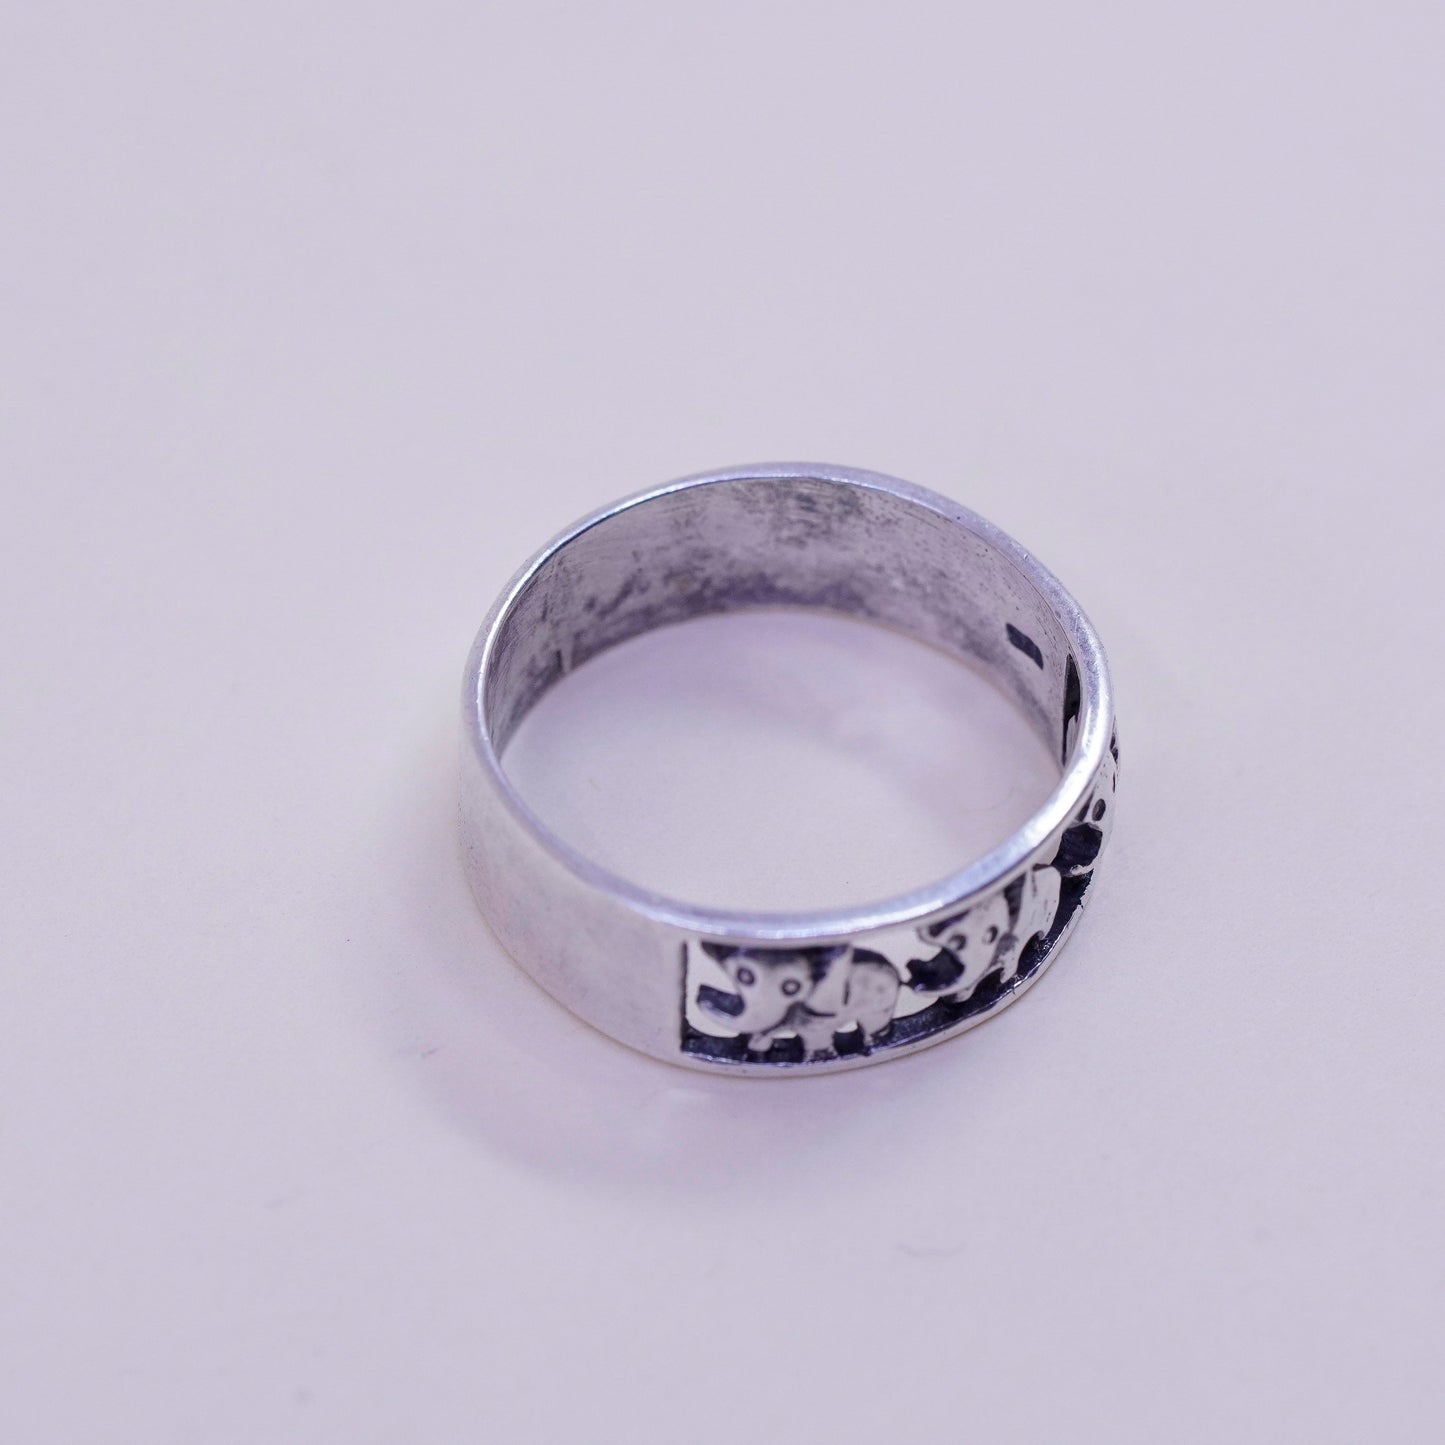 Size 8, vintage sterling silver handmade ring. 925 elephant band